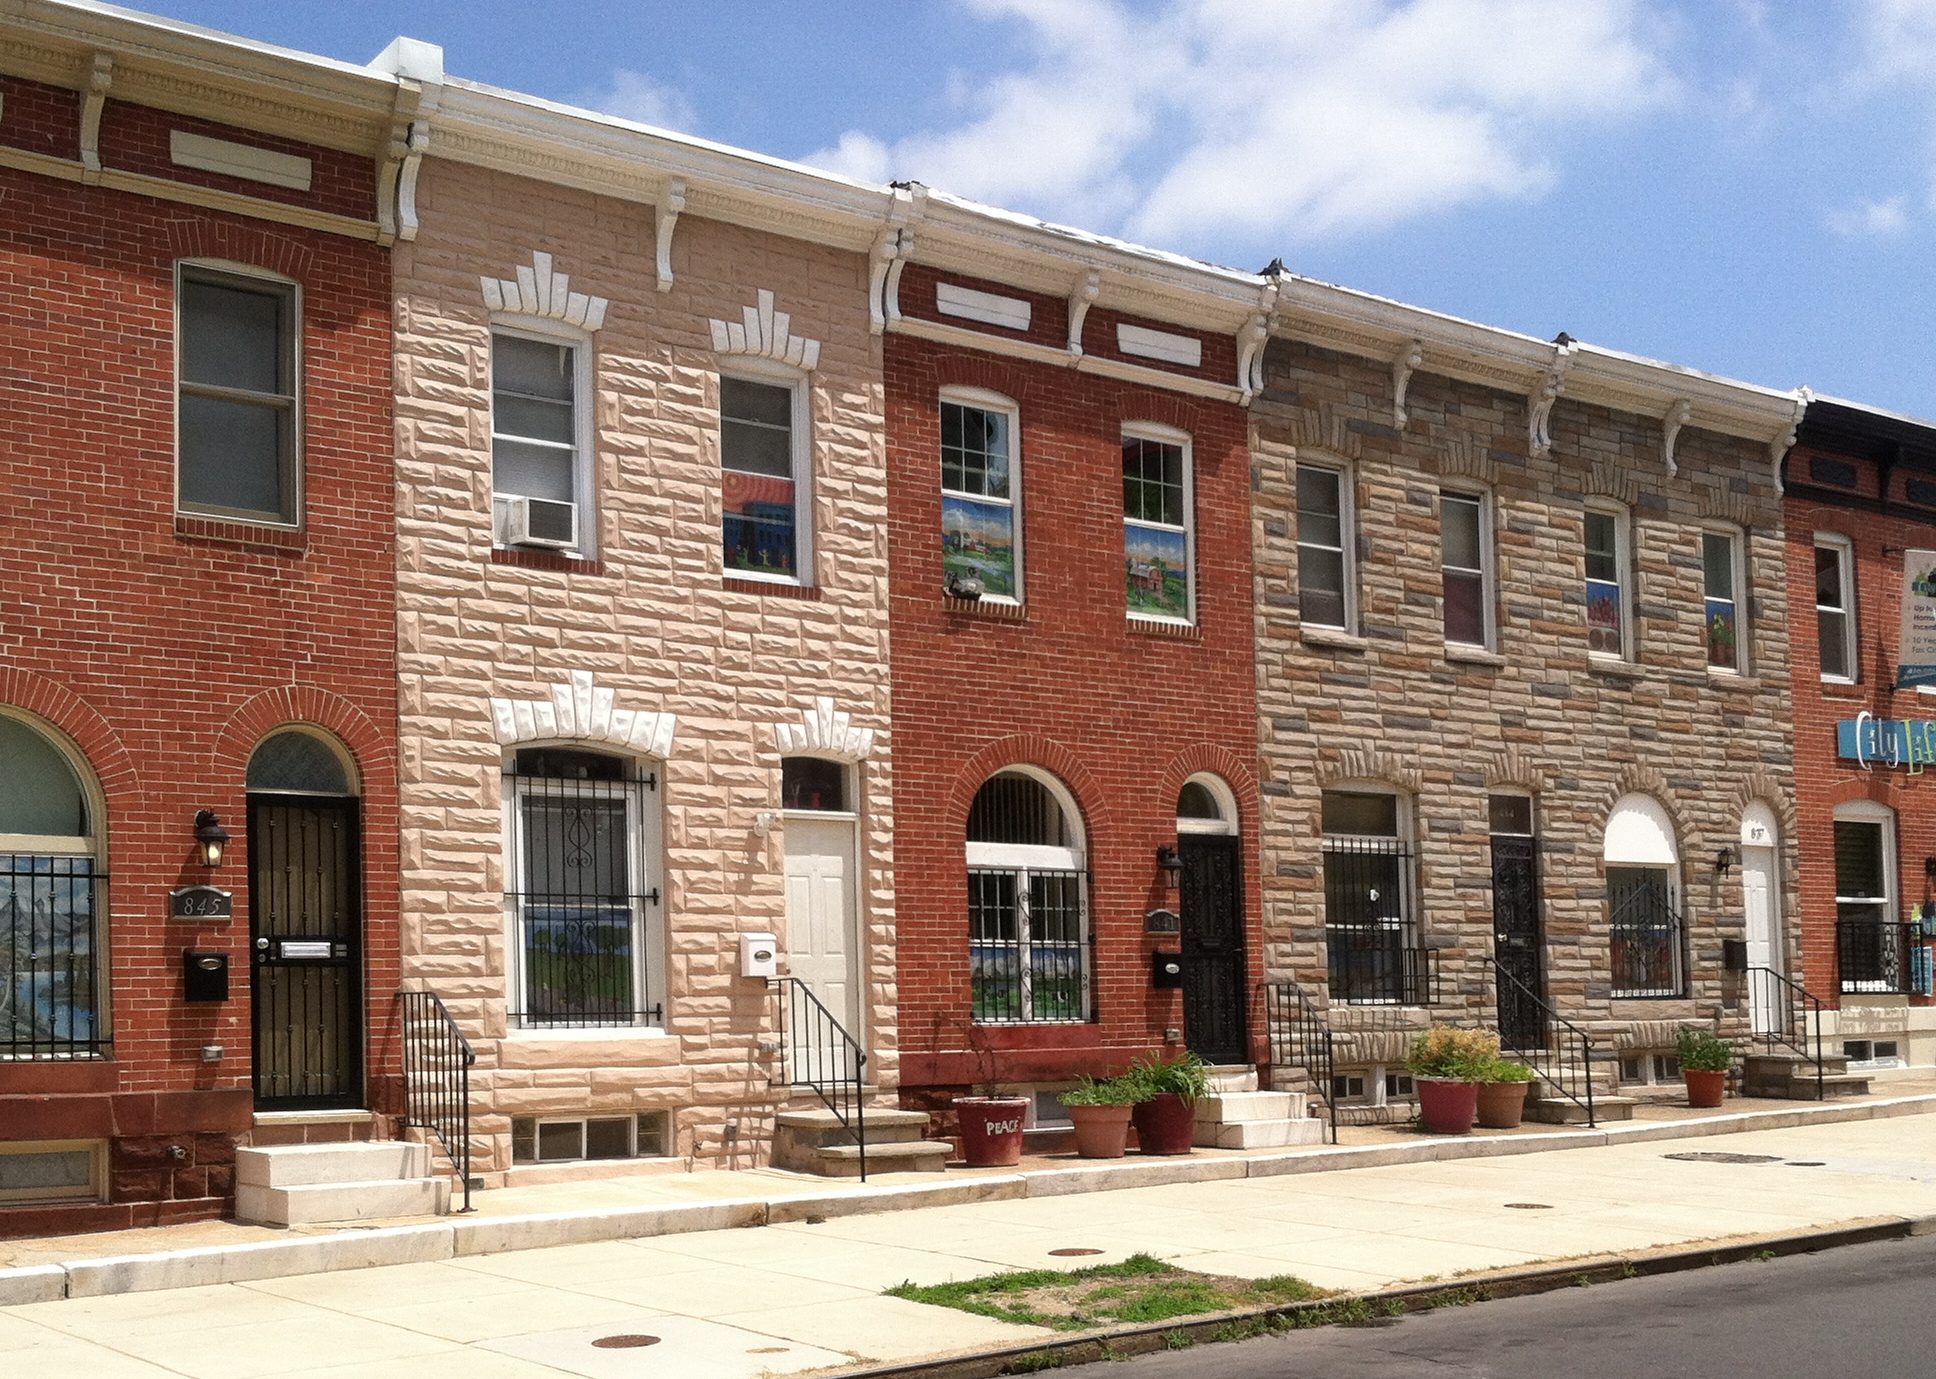 Row houses in Baltimore.